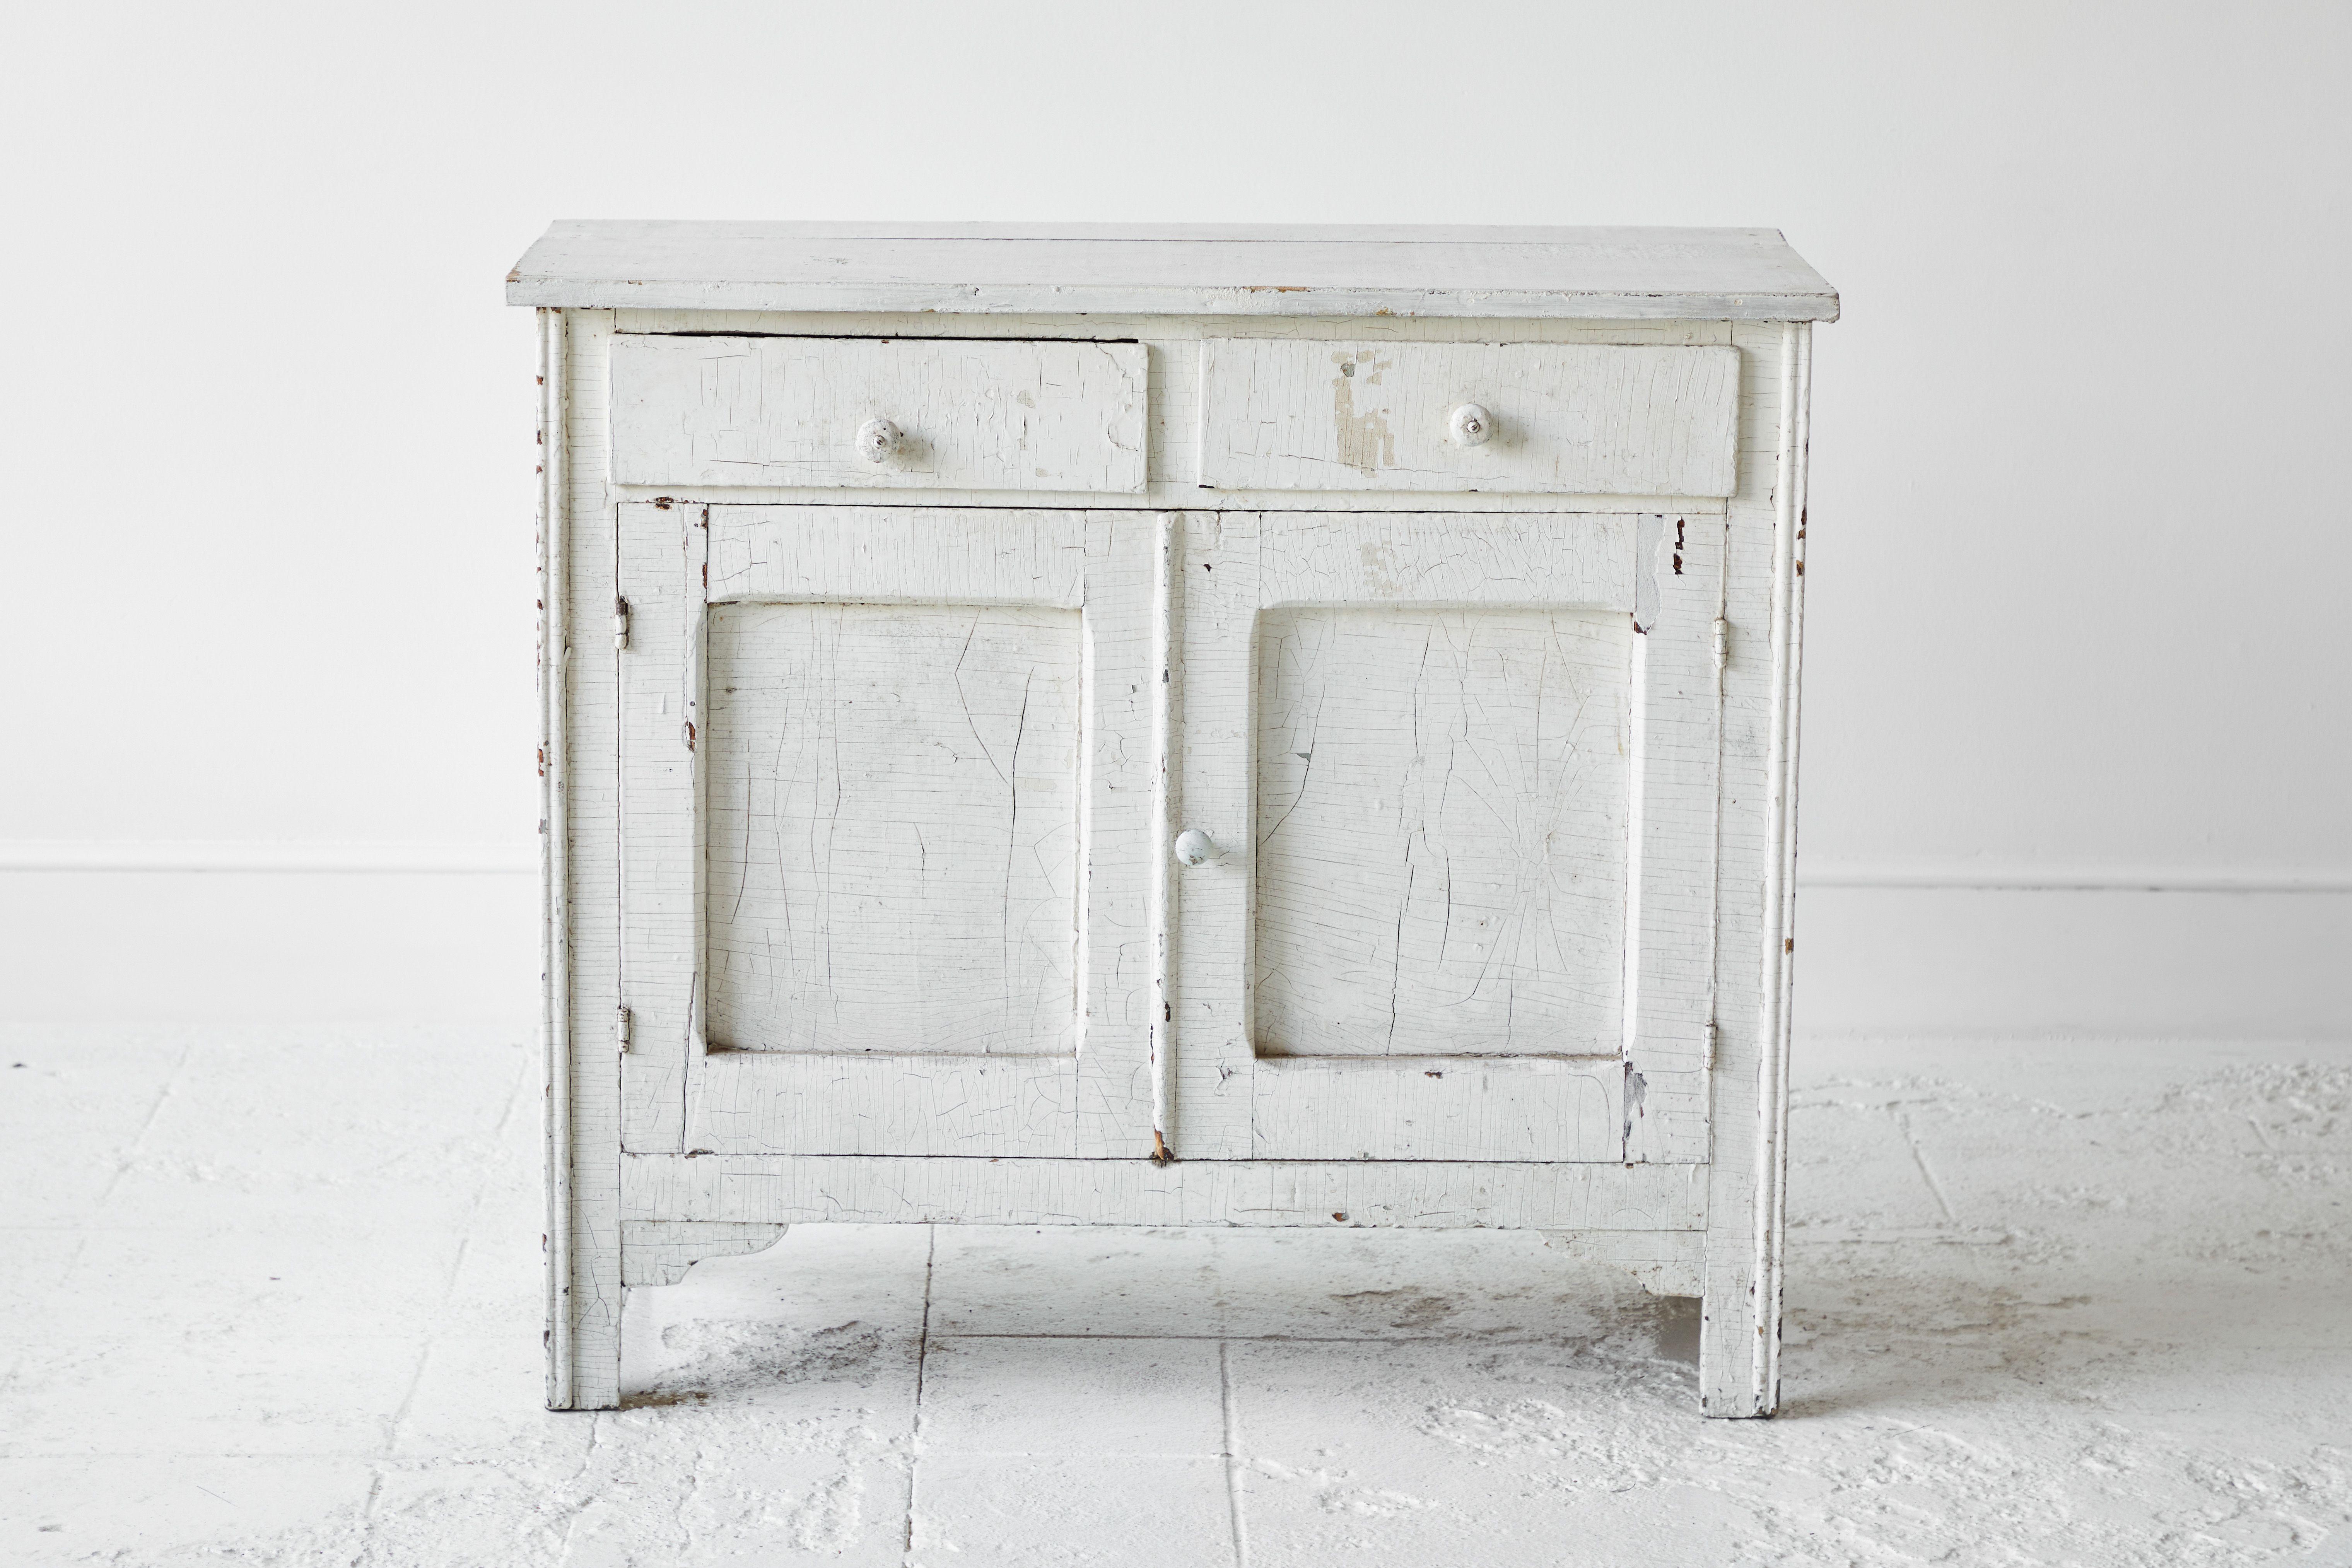 Rustic Early American white painted server with two drawers and two doors. The paint is original and boasts patina and charm.